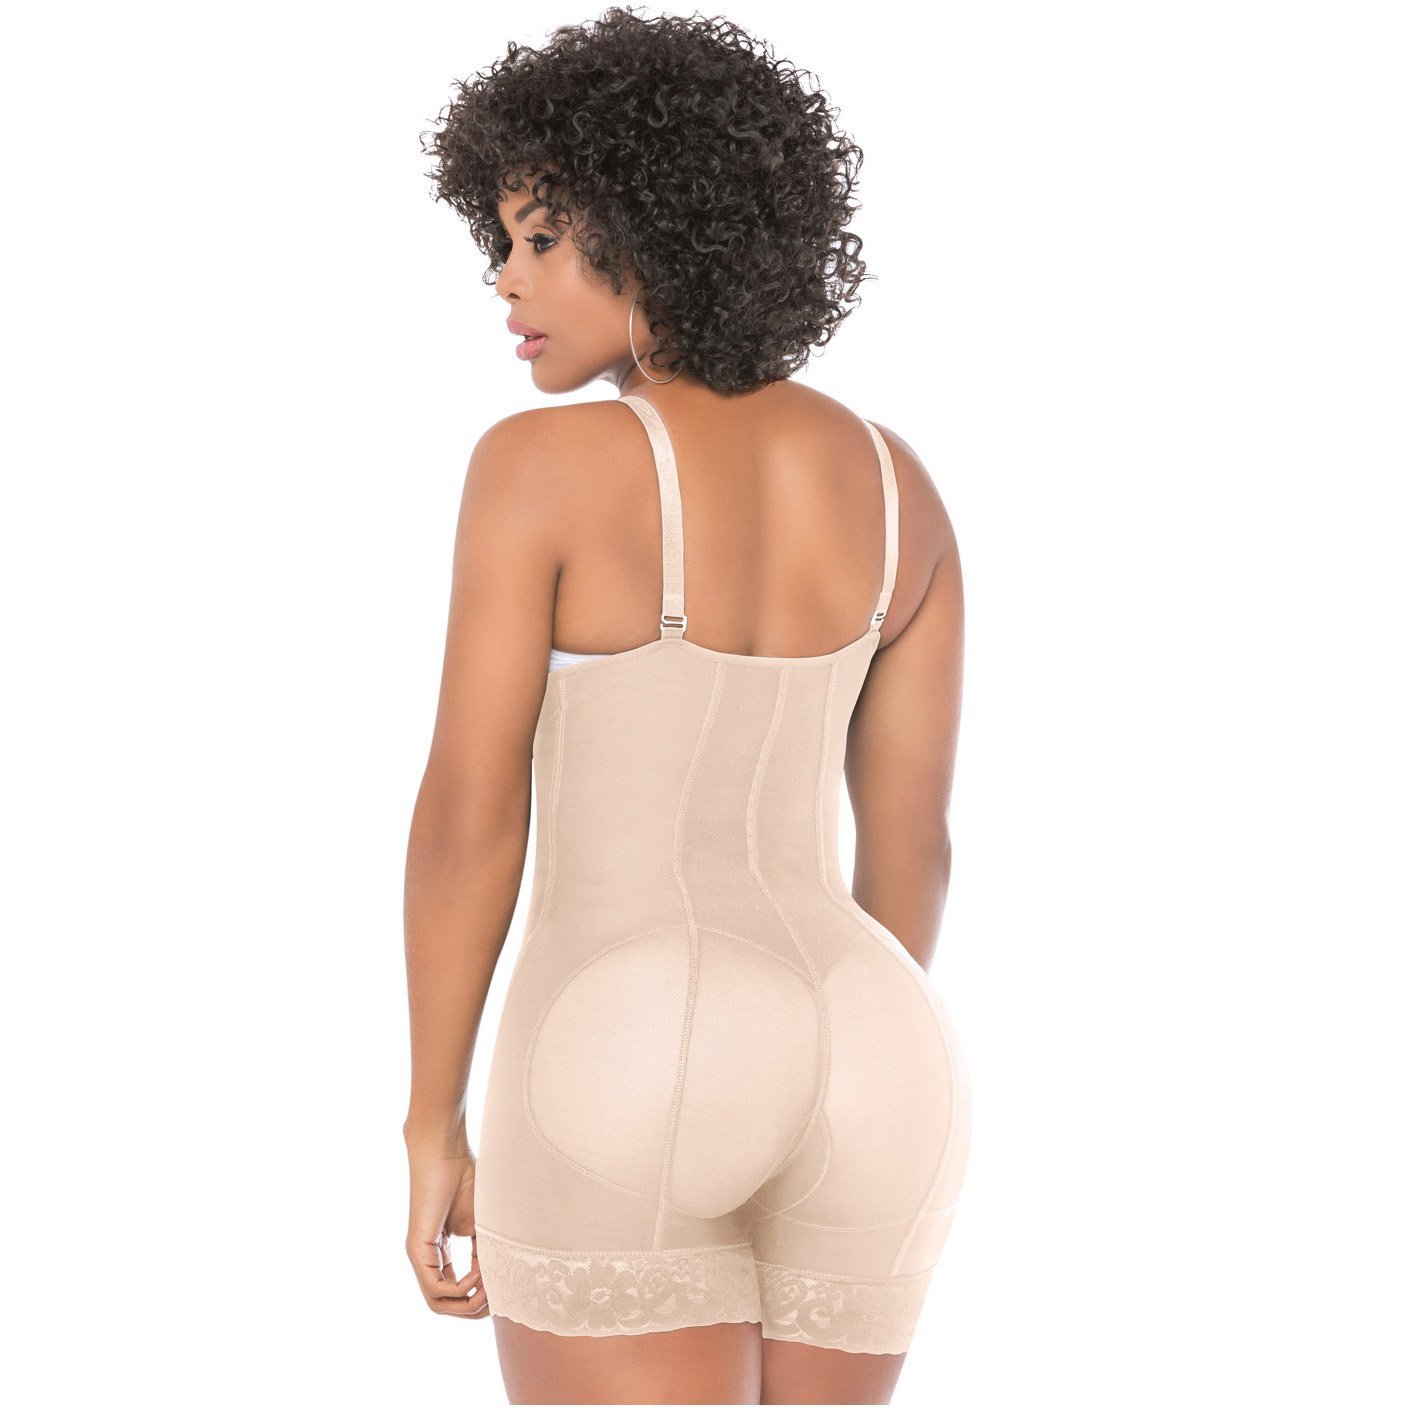 FAJAS SALOME 0214 Mid Thigh Strapless Body Shaper for Dresses - New England Supplier